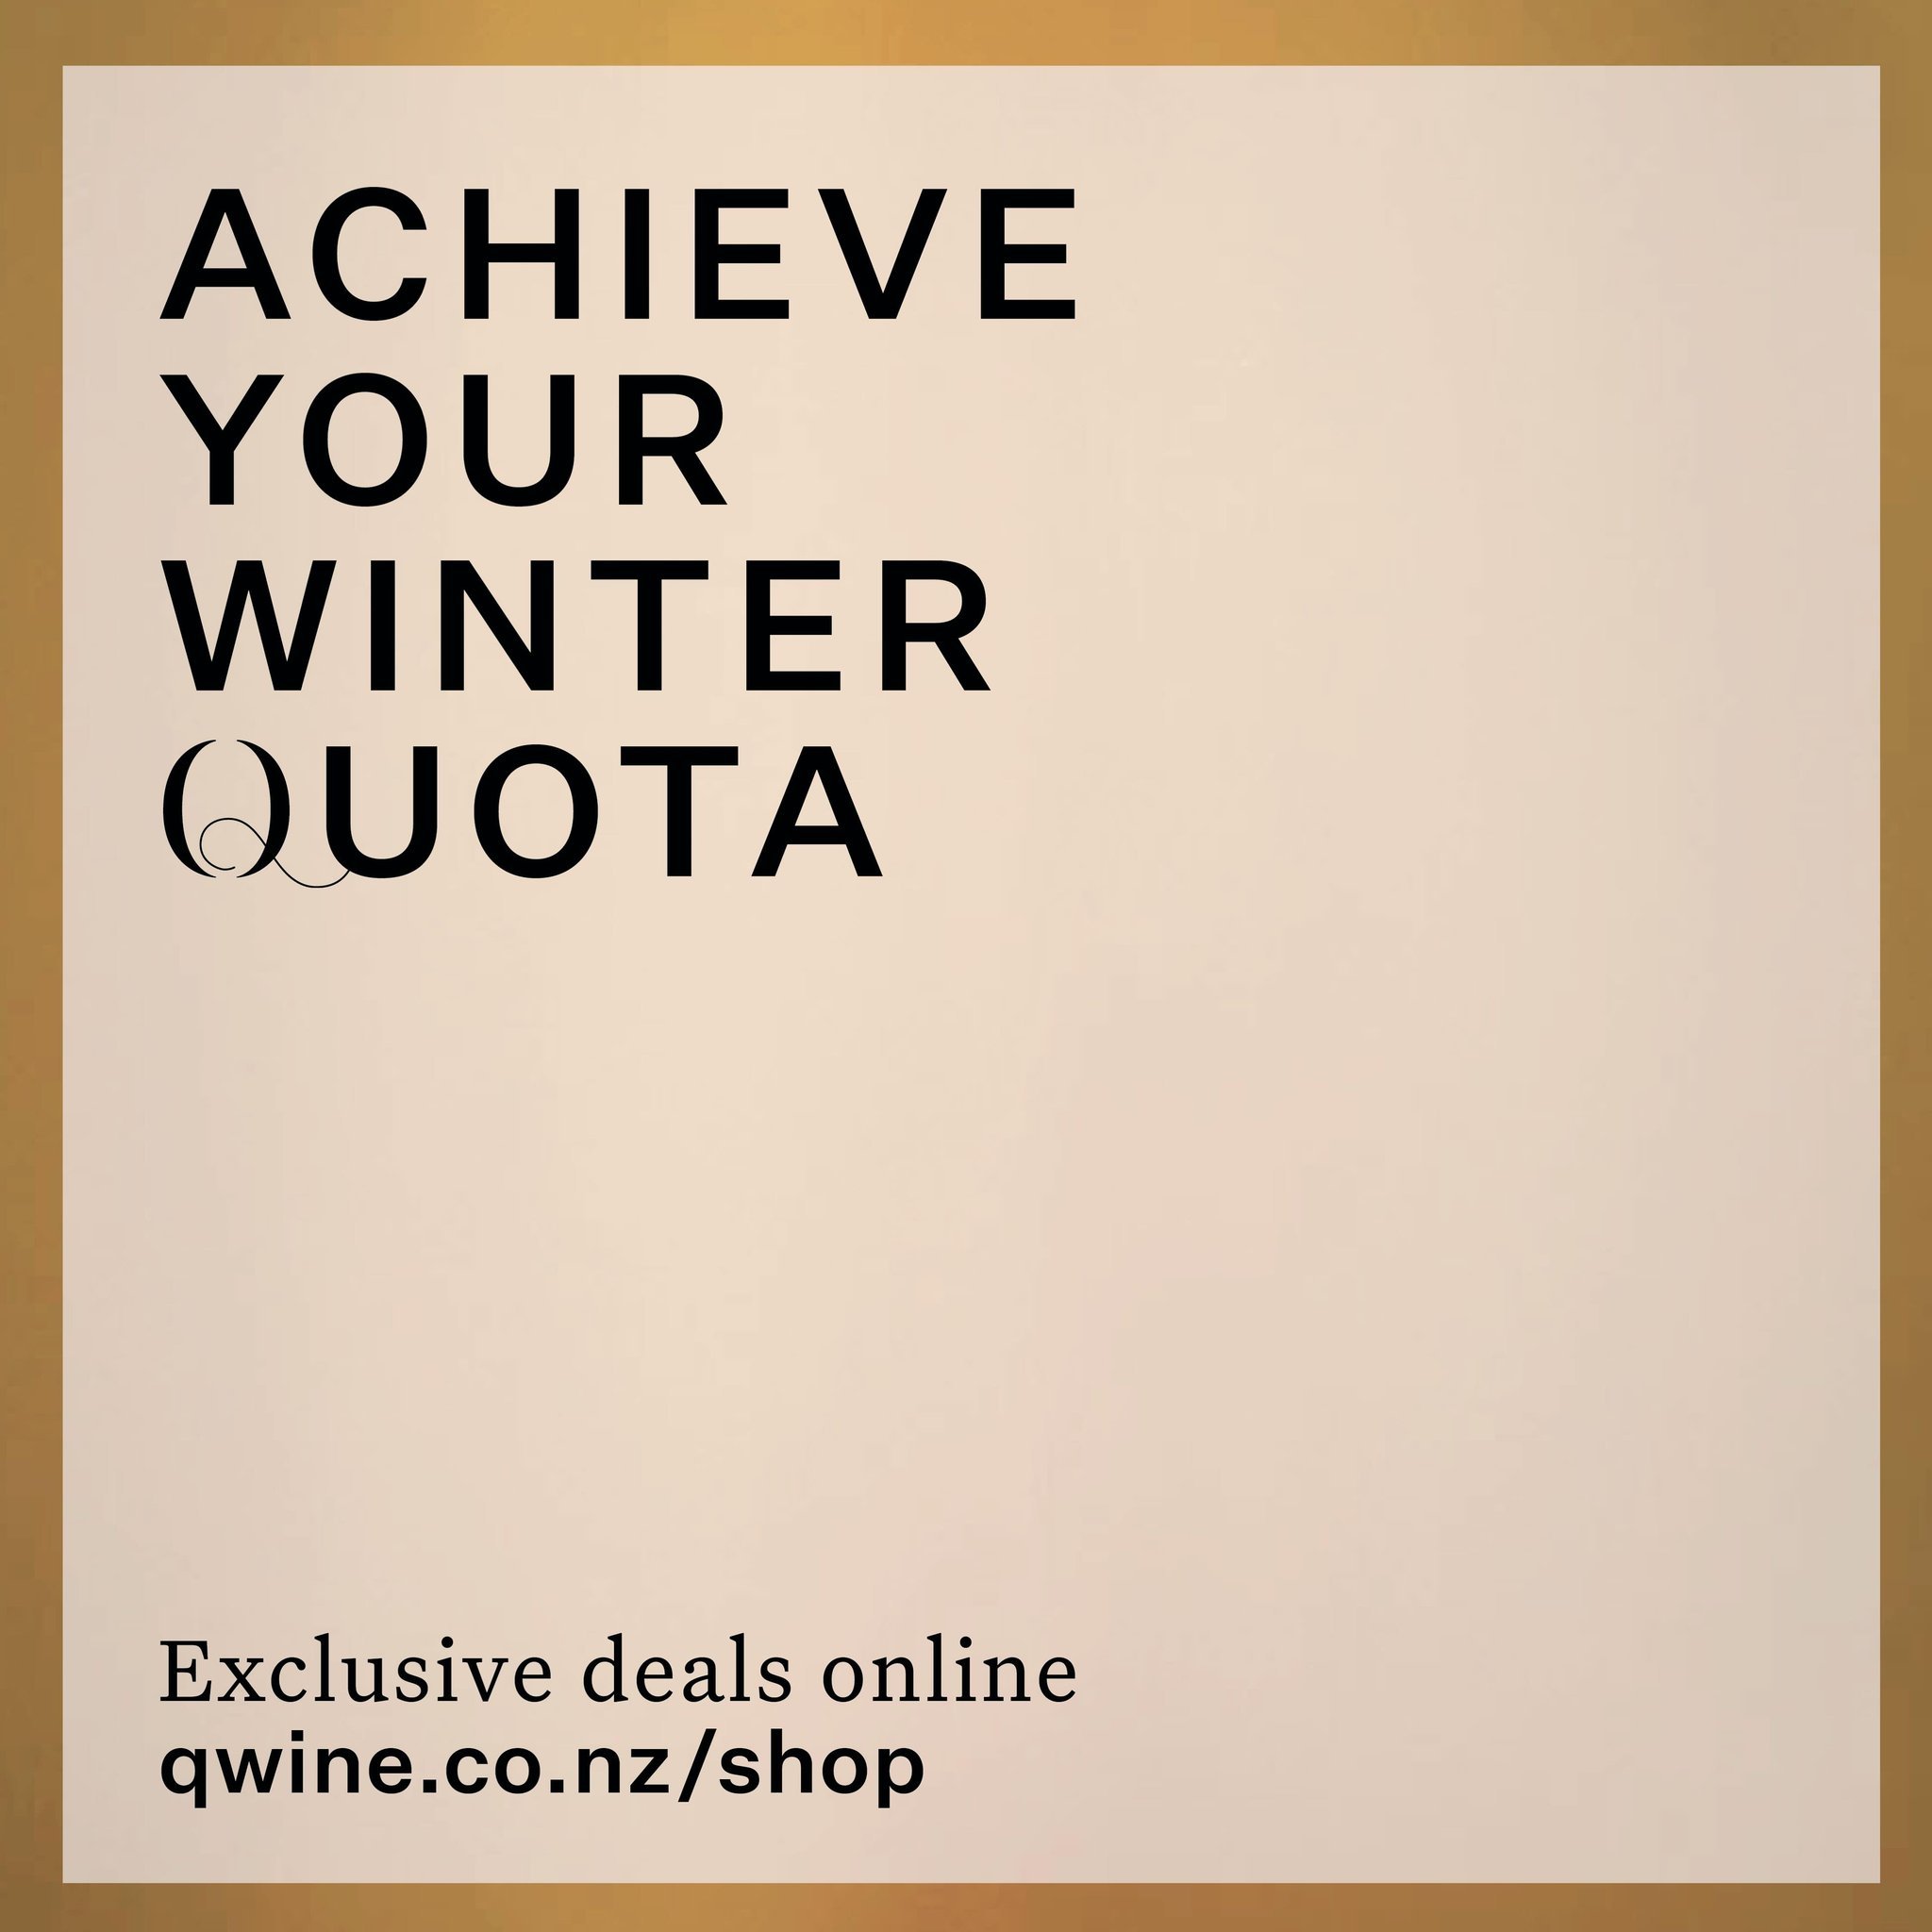 Winterising &ndash; what do you need 🍷

BUY your wine online, Join QWINE club now by clicking the link in our profile

Our wine comes from Waitaki Valley &ndash; where limestone soils, dry summers and cold winters provide magical conditions perfect 